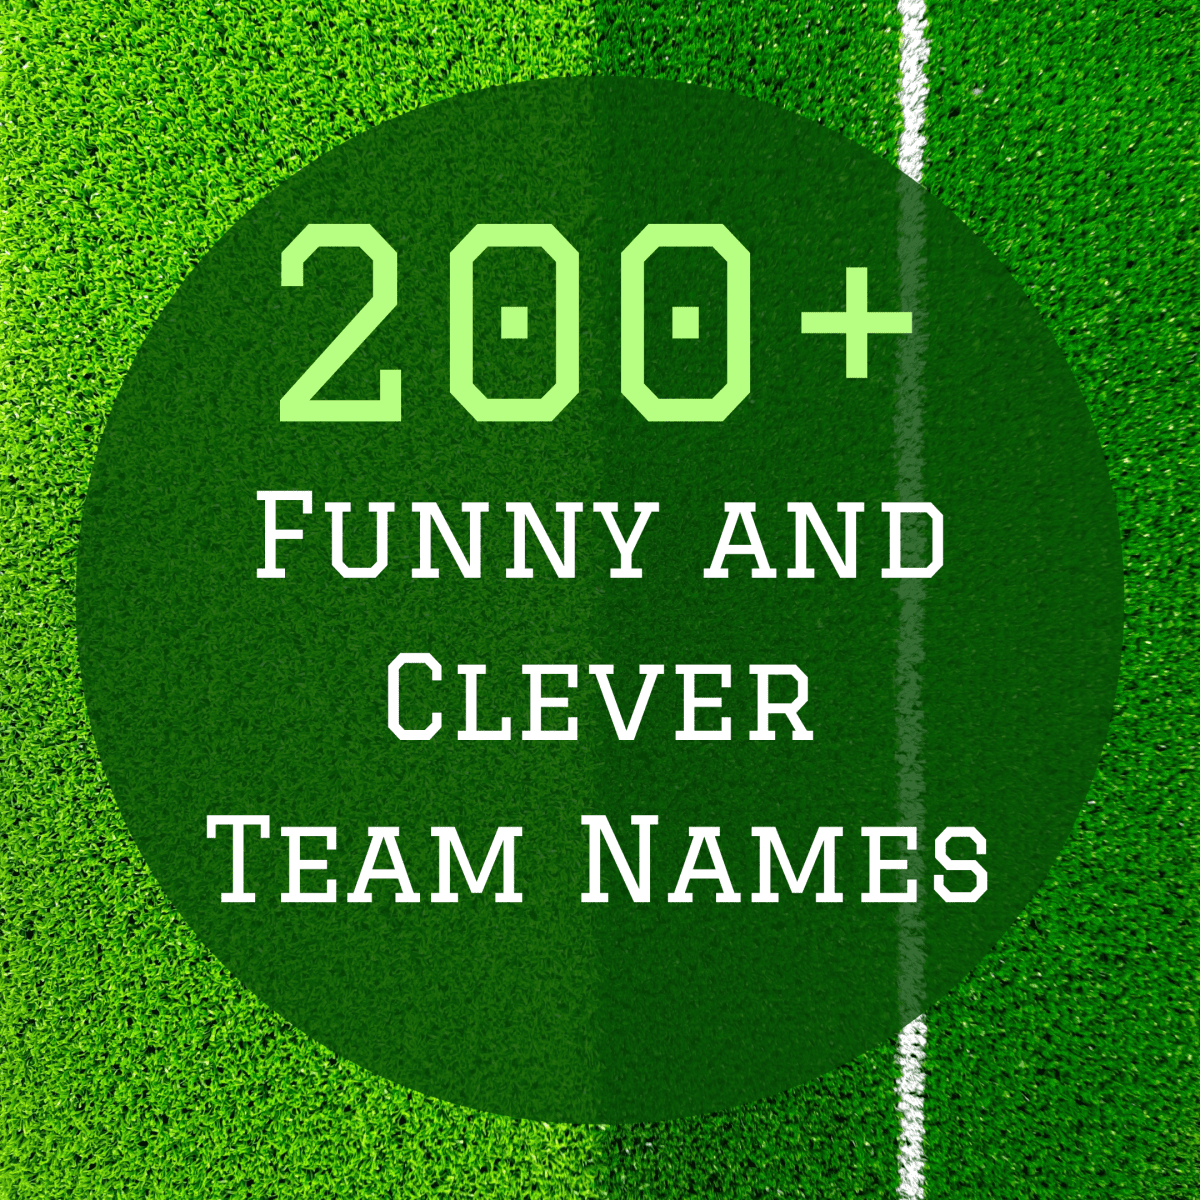 Explore a complete set of Cool, Funny, and Clever Team Names. Whether you are forming a trivia team or looking for a football team name.